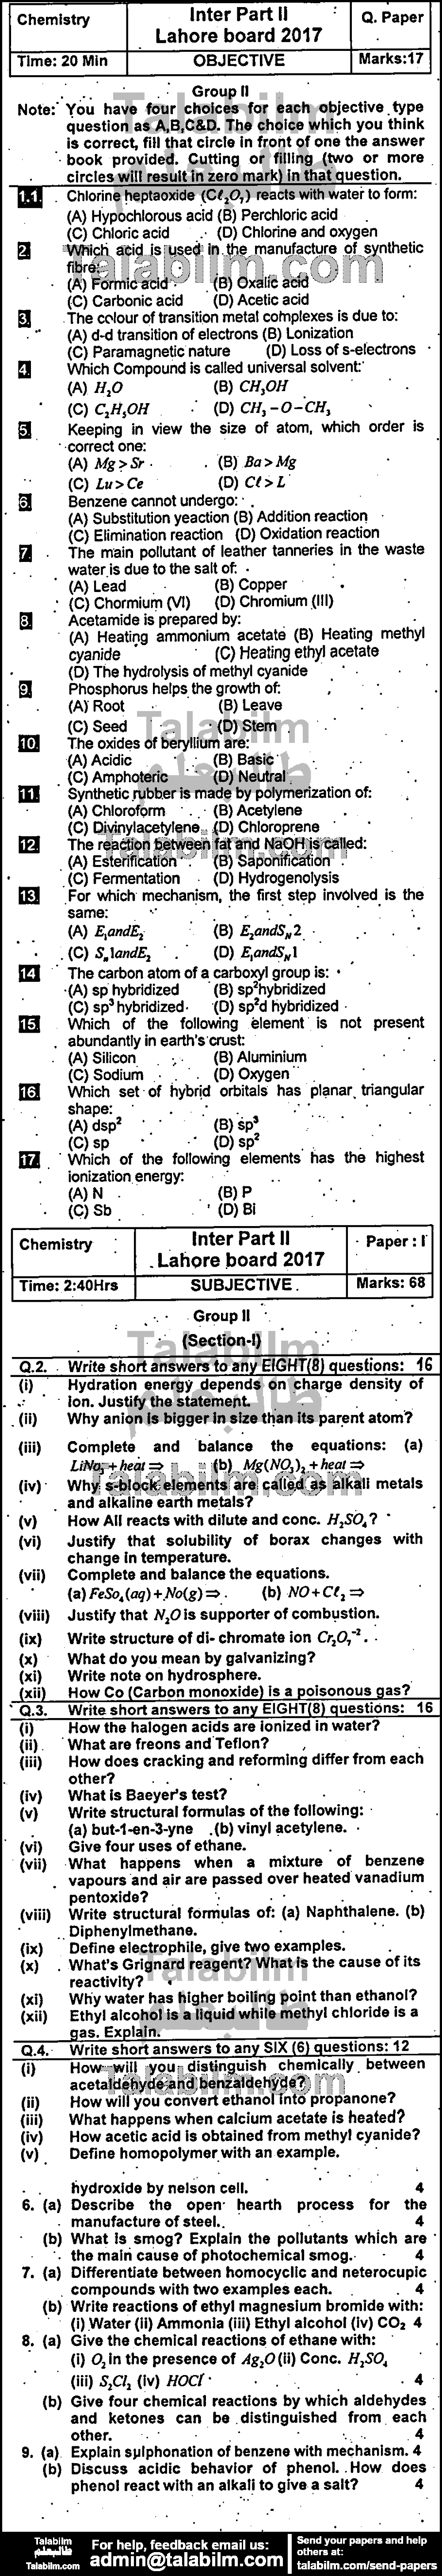 Chemistry 0 past paper for Group-II 2017